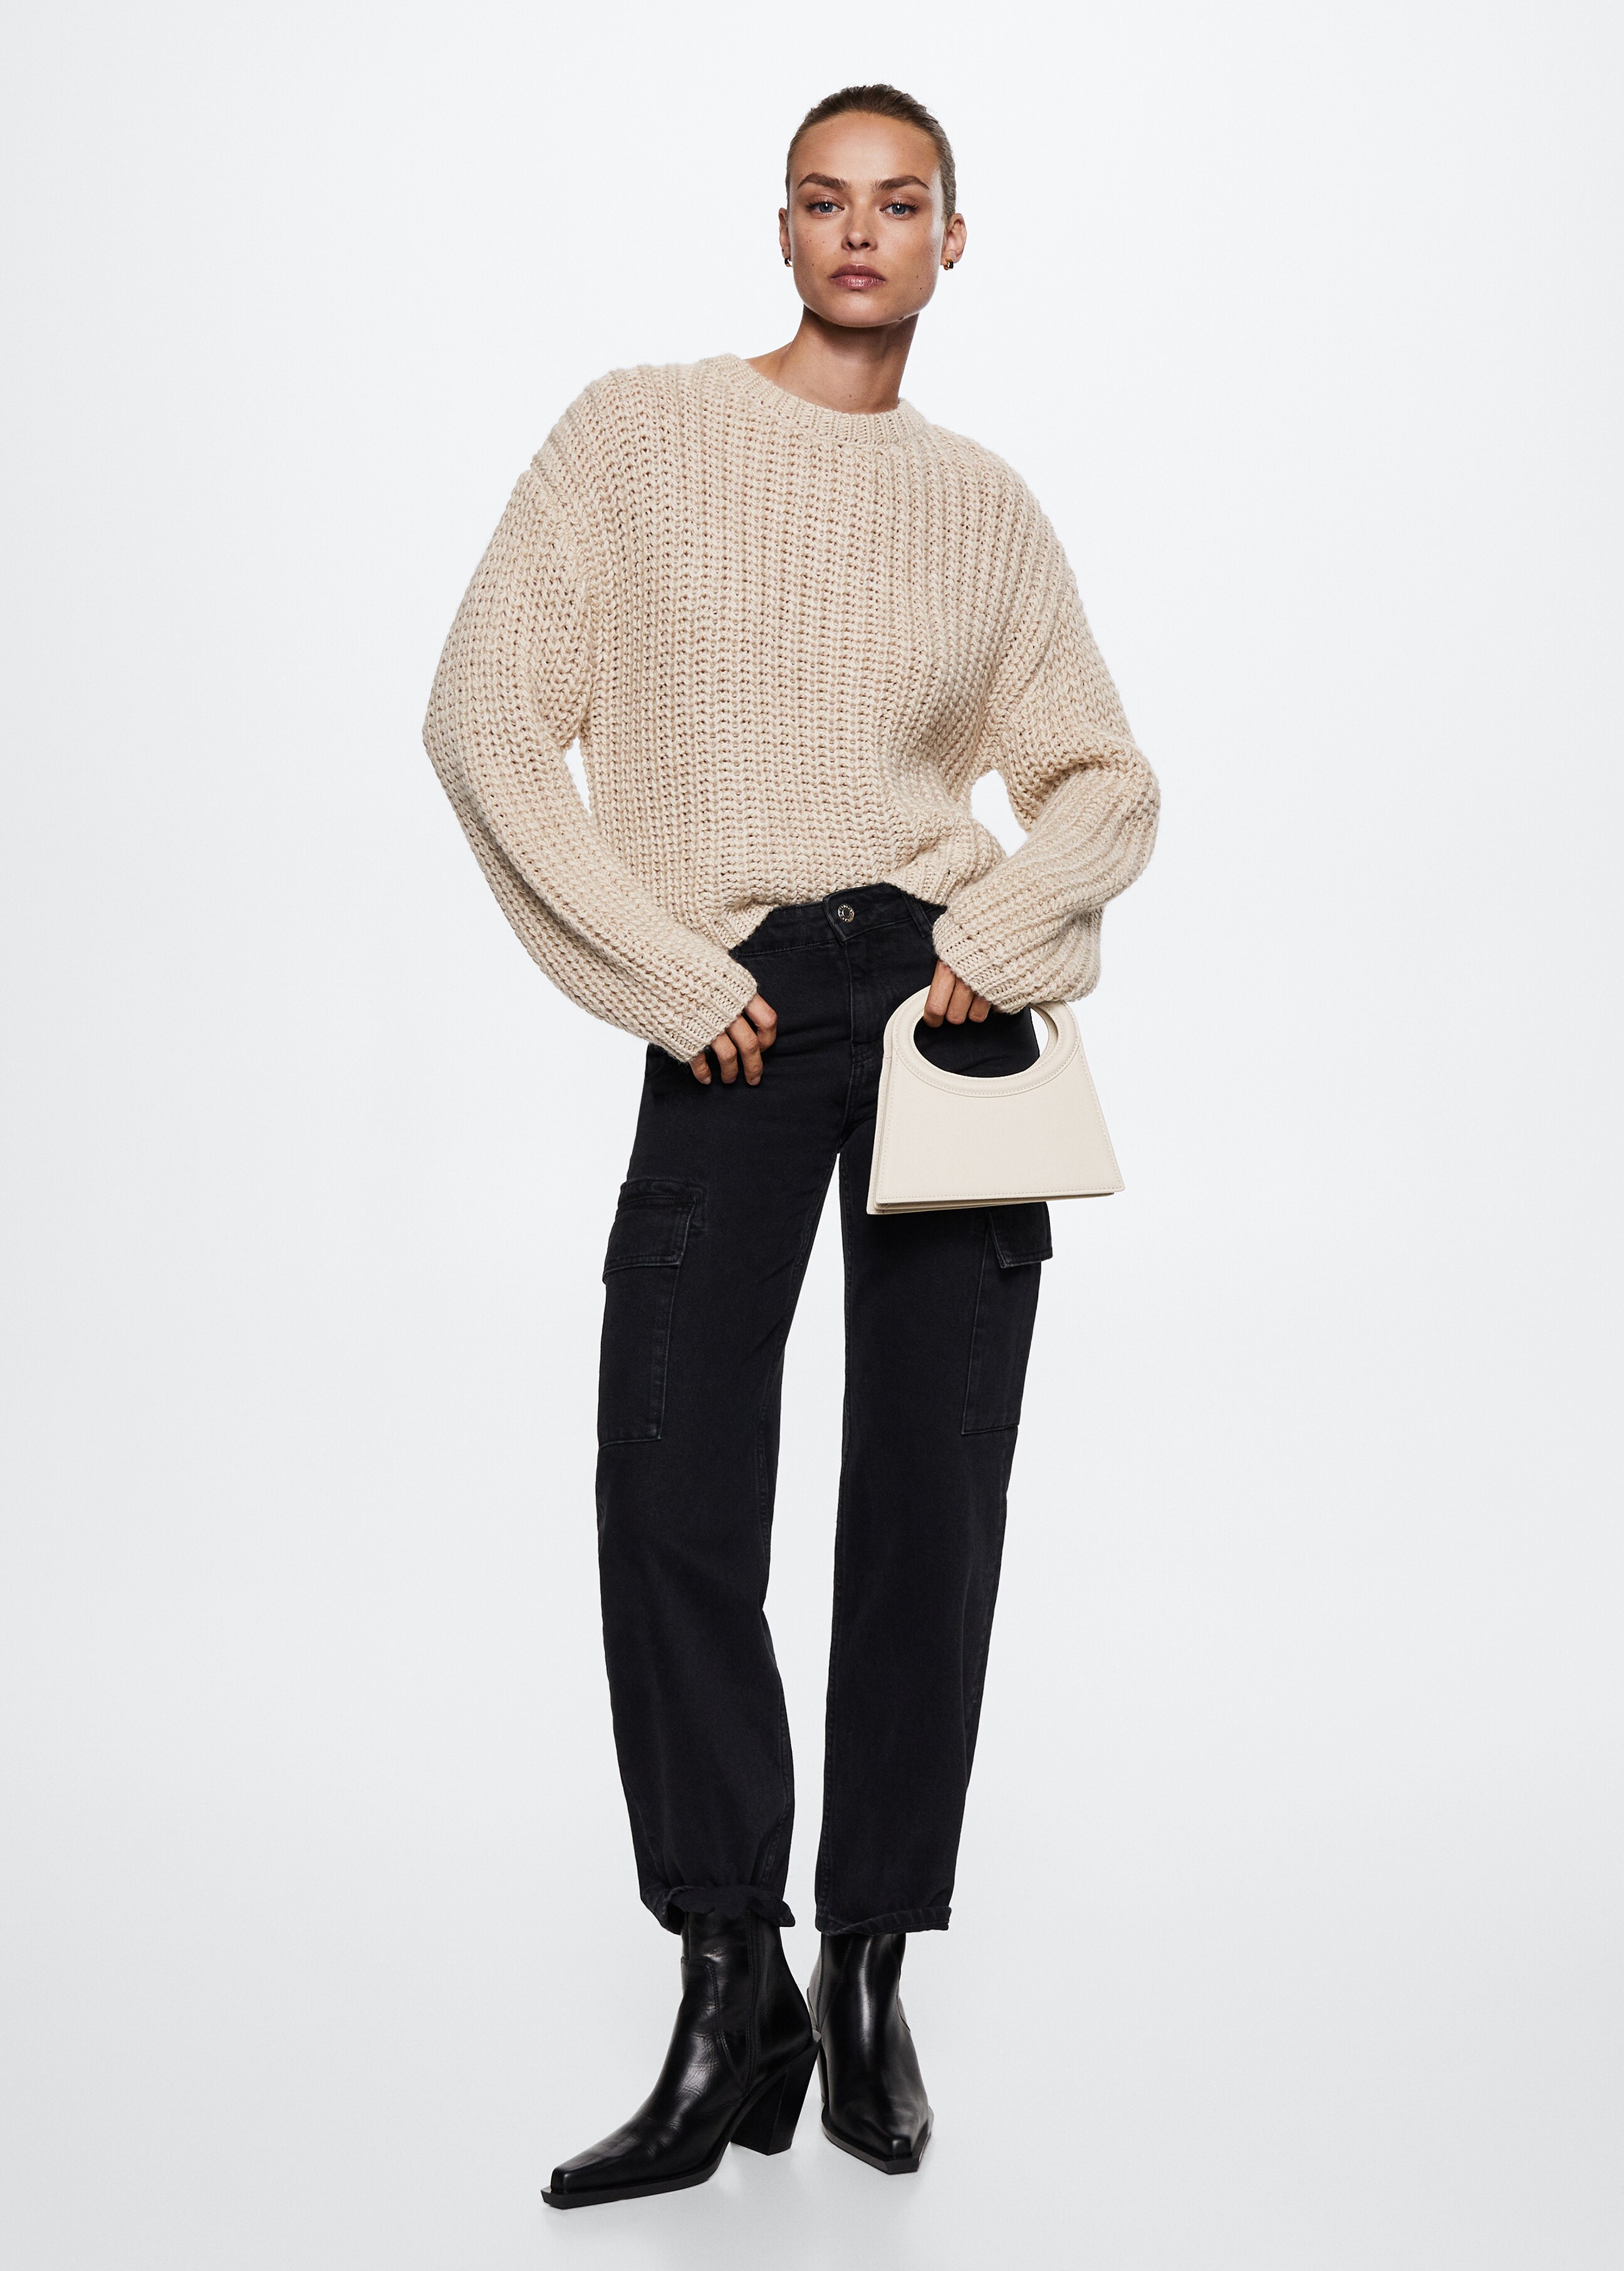 Chunky-knit sweater - General plane